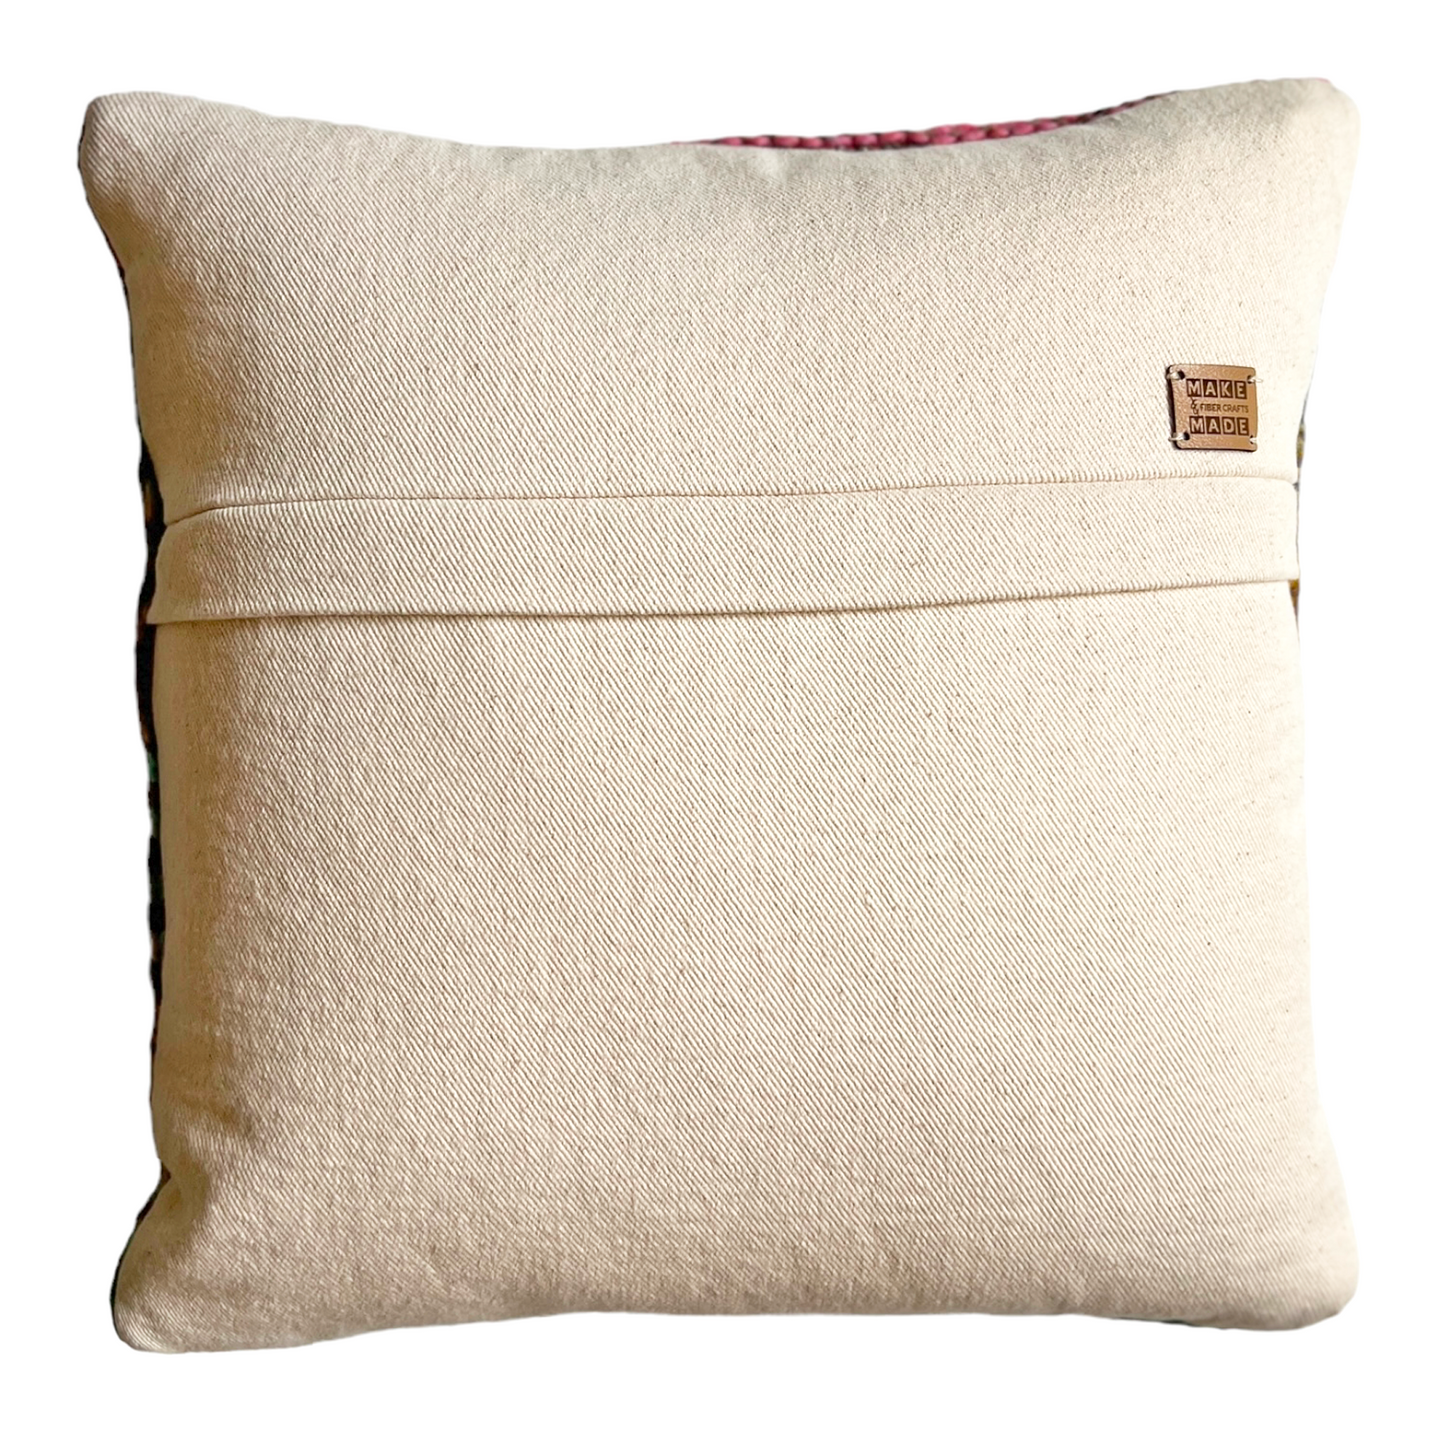 The back side of this pillow is natural bull denim. A hidden zipper runs horizontally through the middle of the pillow and includes a leather Make & Made Fiber Crafts label.